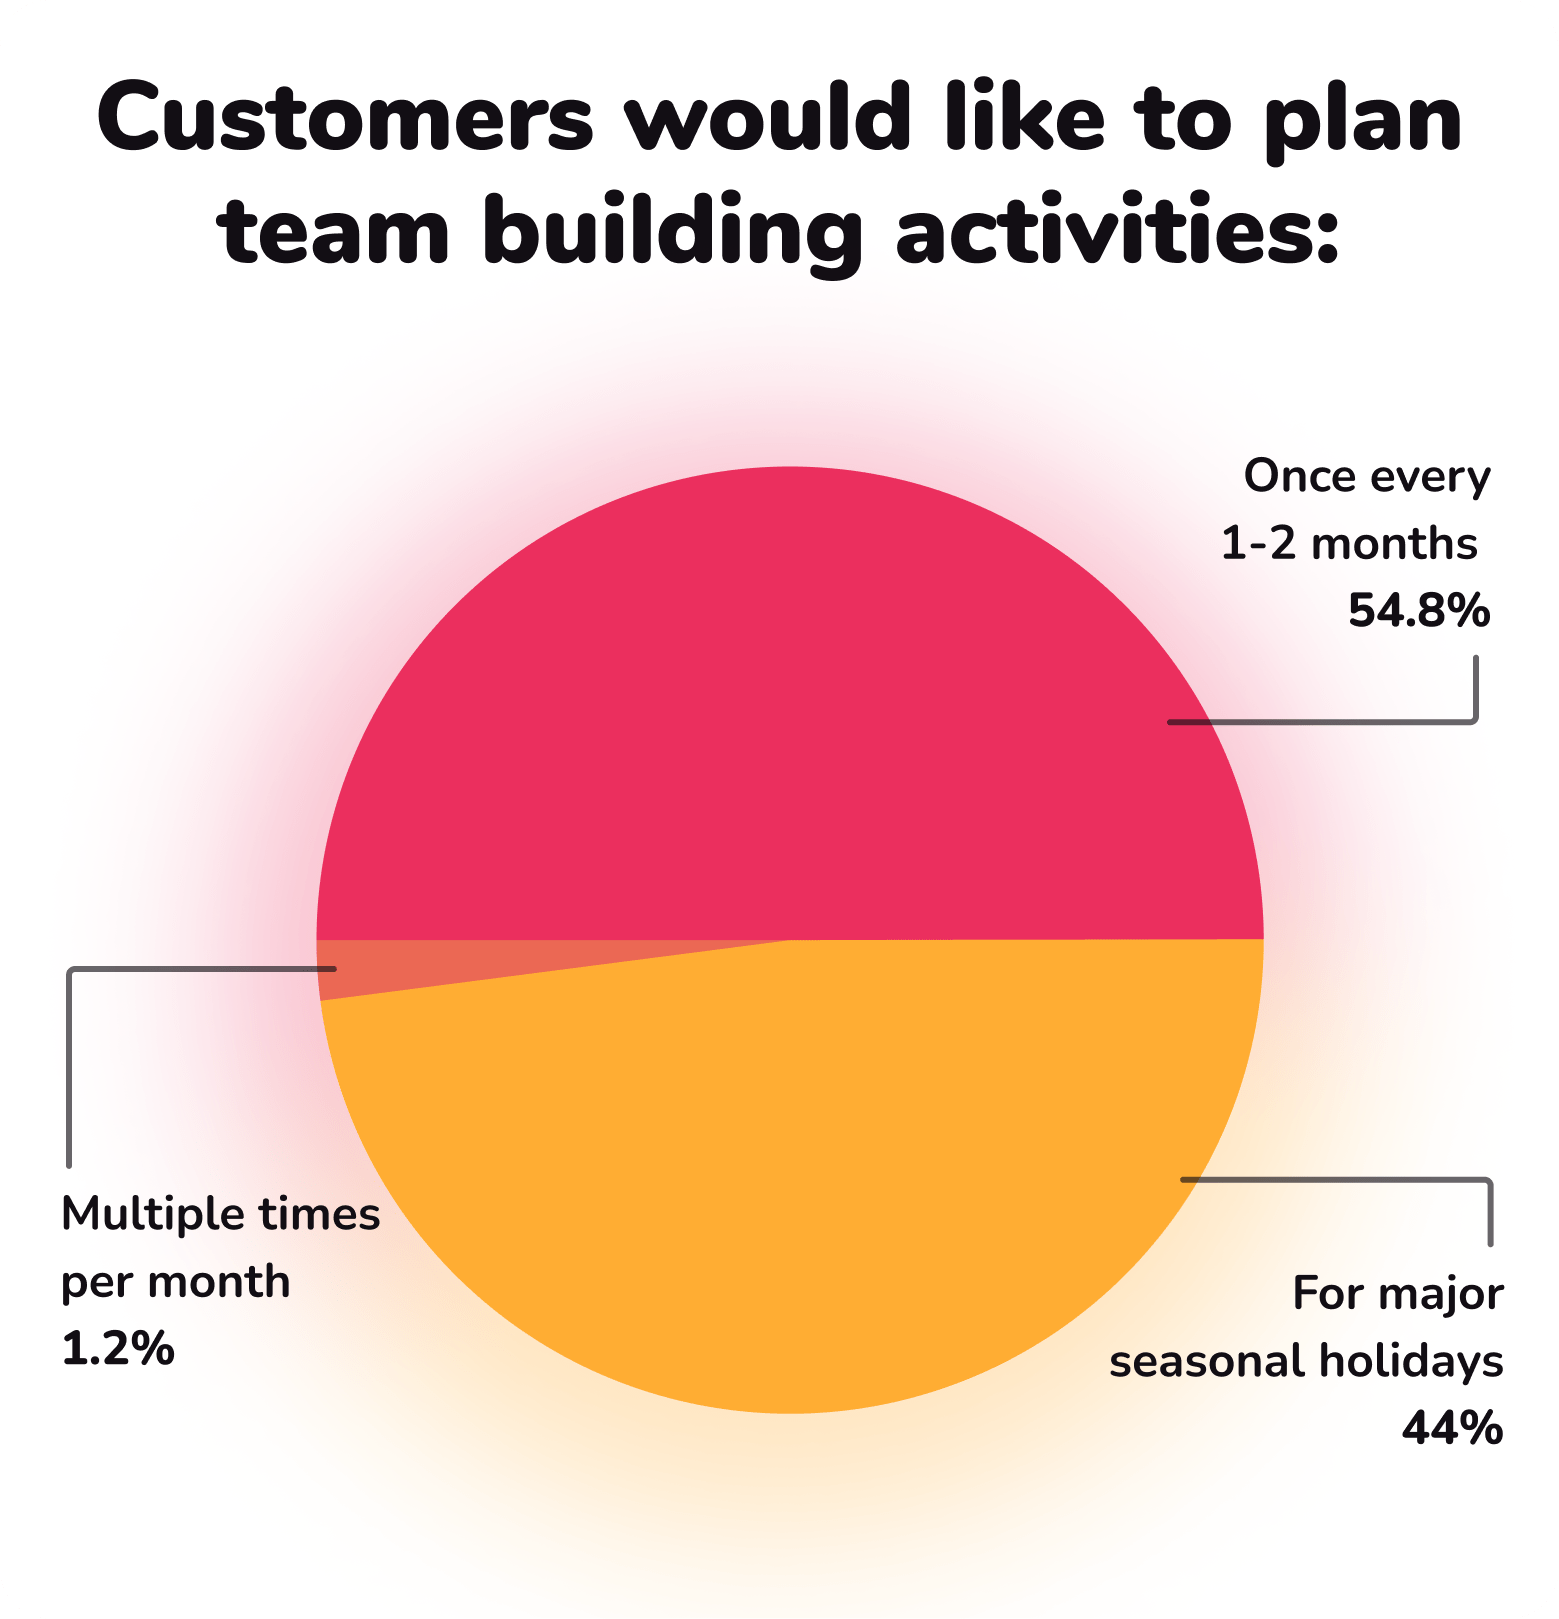 Customers would like to plan team building activities: Once every 1-2 months (54.8%), For major seasonal holidays (44%), Multiple times per month (1.2%)